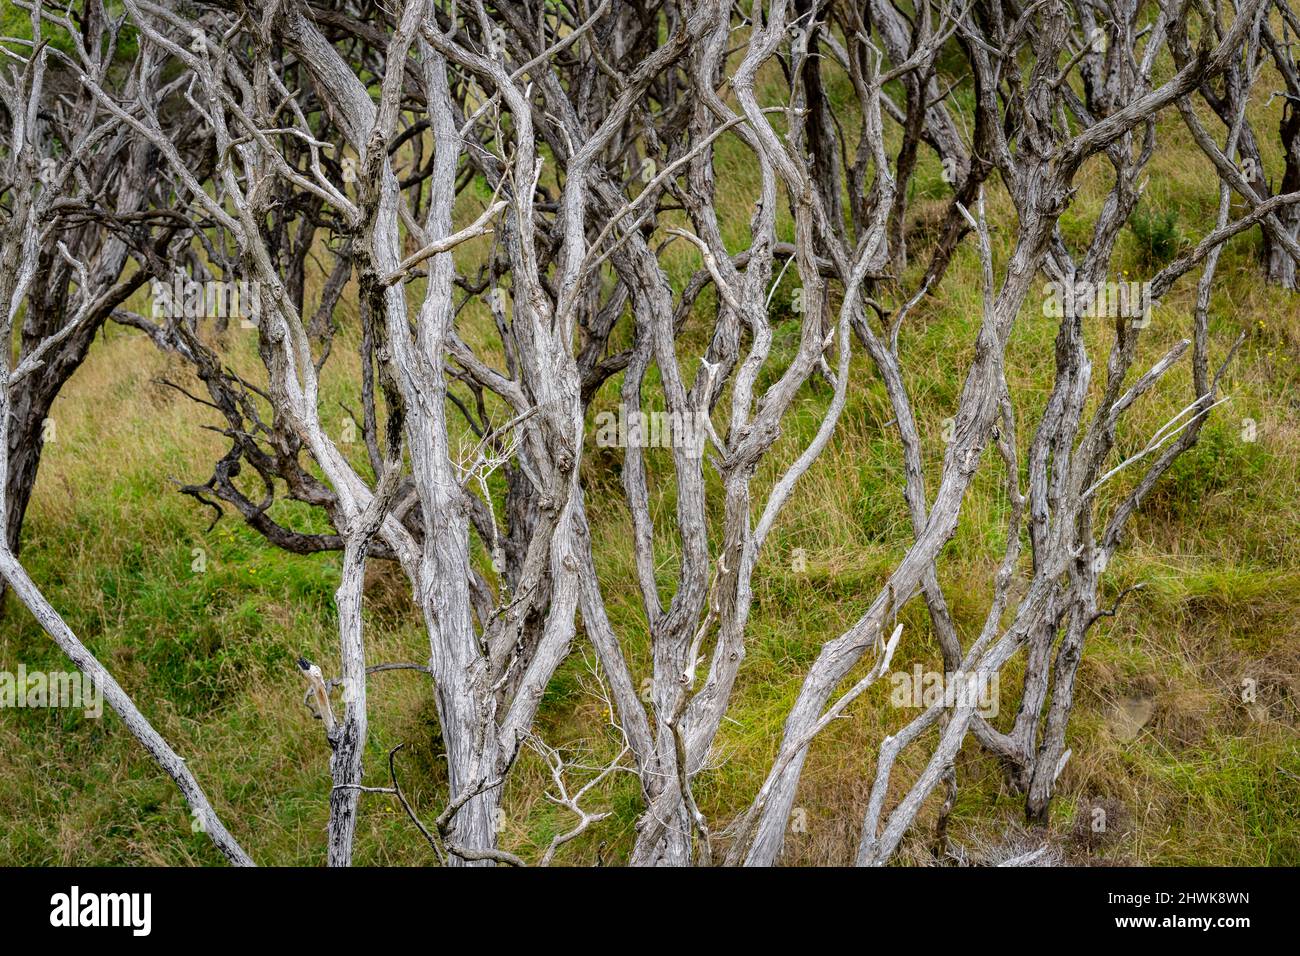 Gnarly wriggly manuka tree stems in forest abstract. Stock Photo